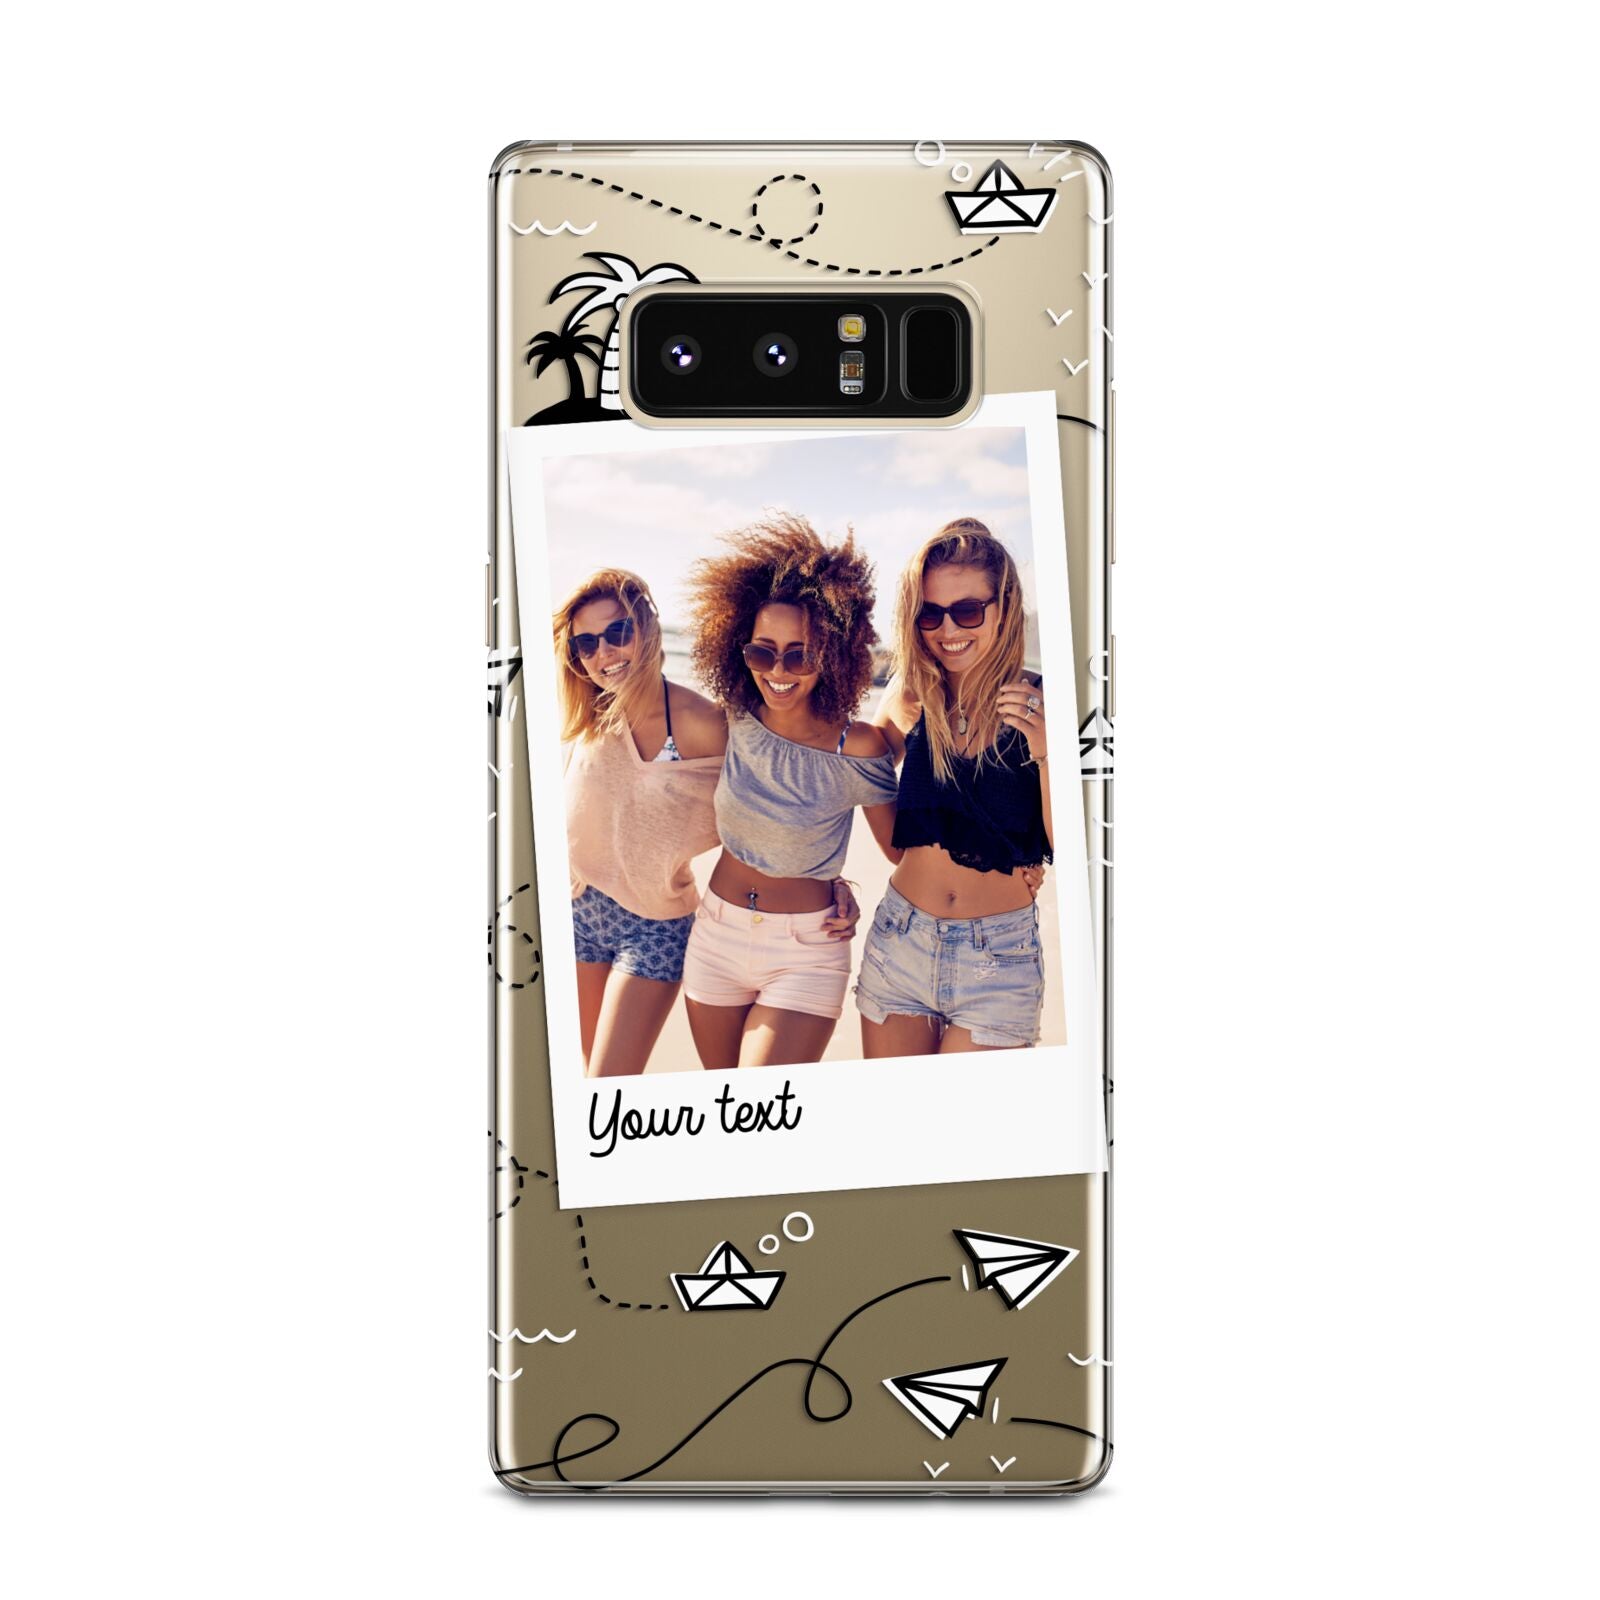 Personalised Photo Travel Samsung Galaxy Note 8 Case